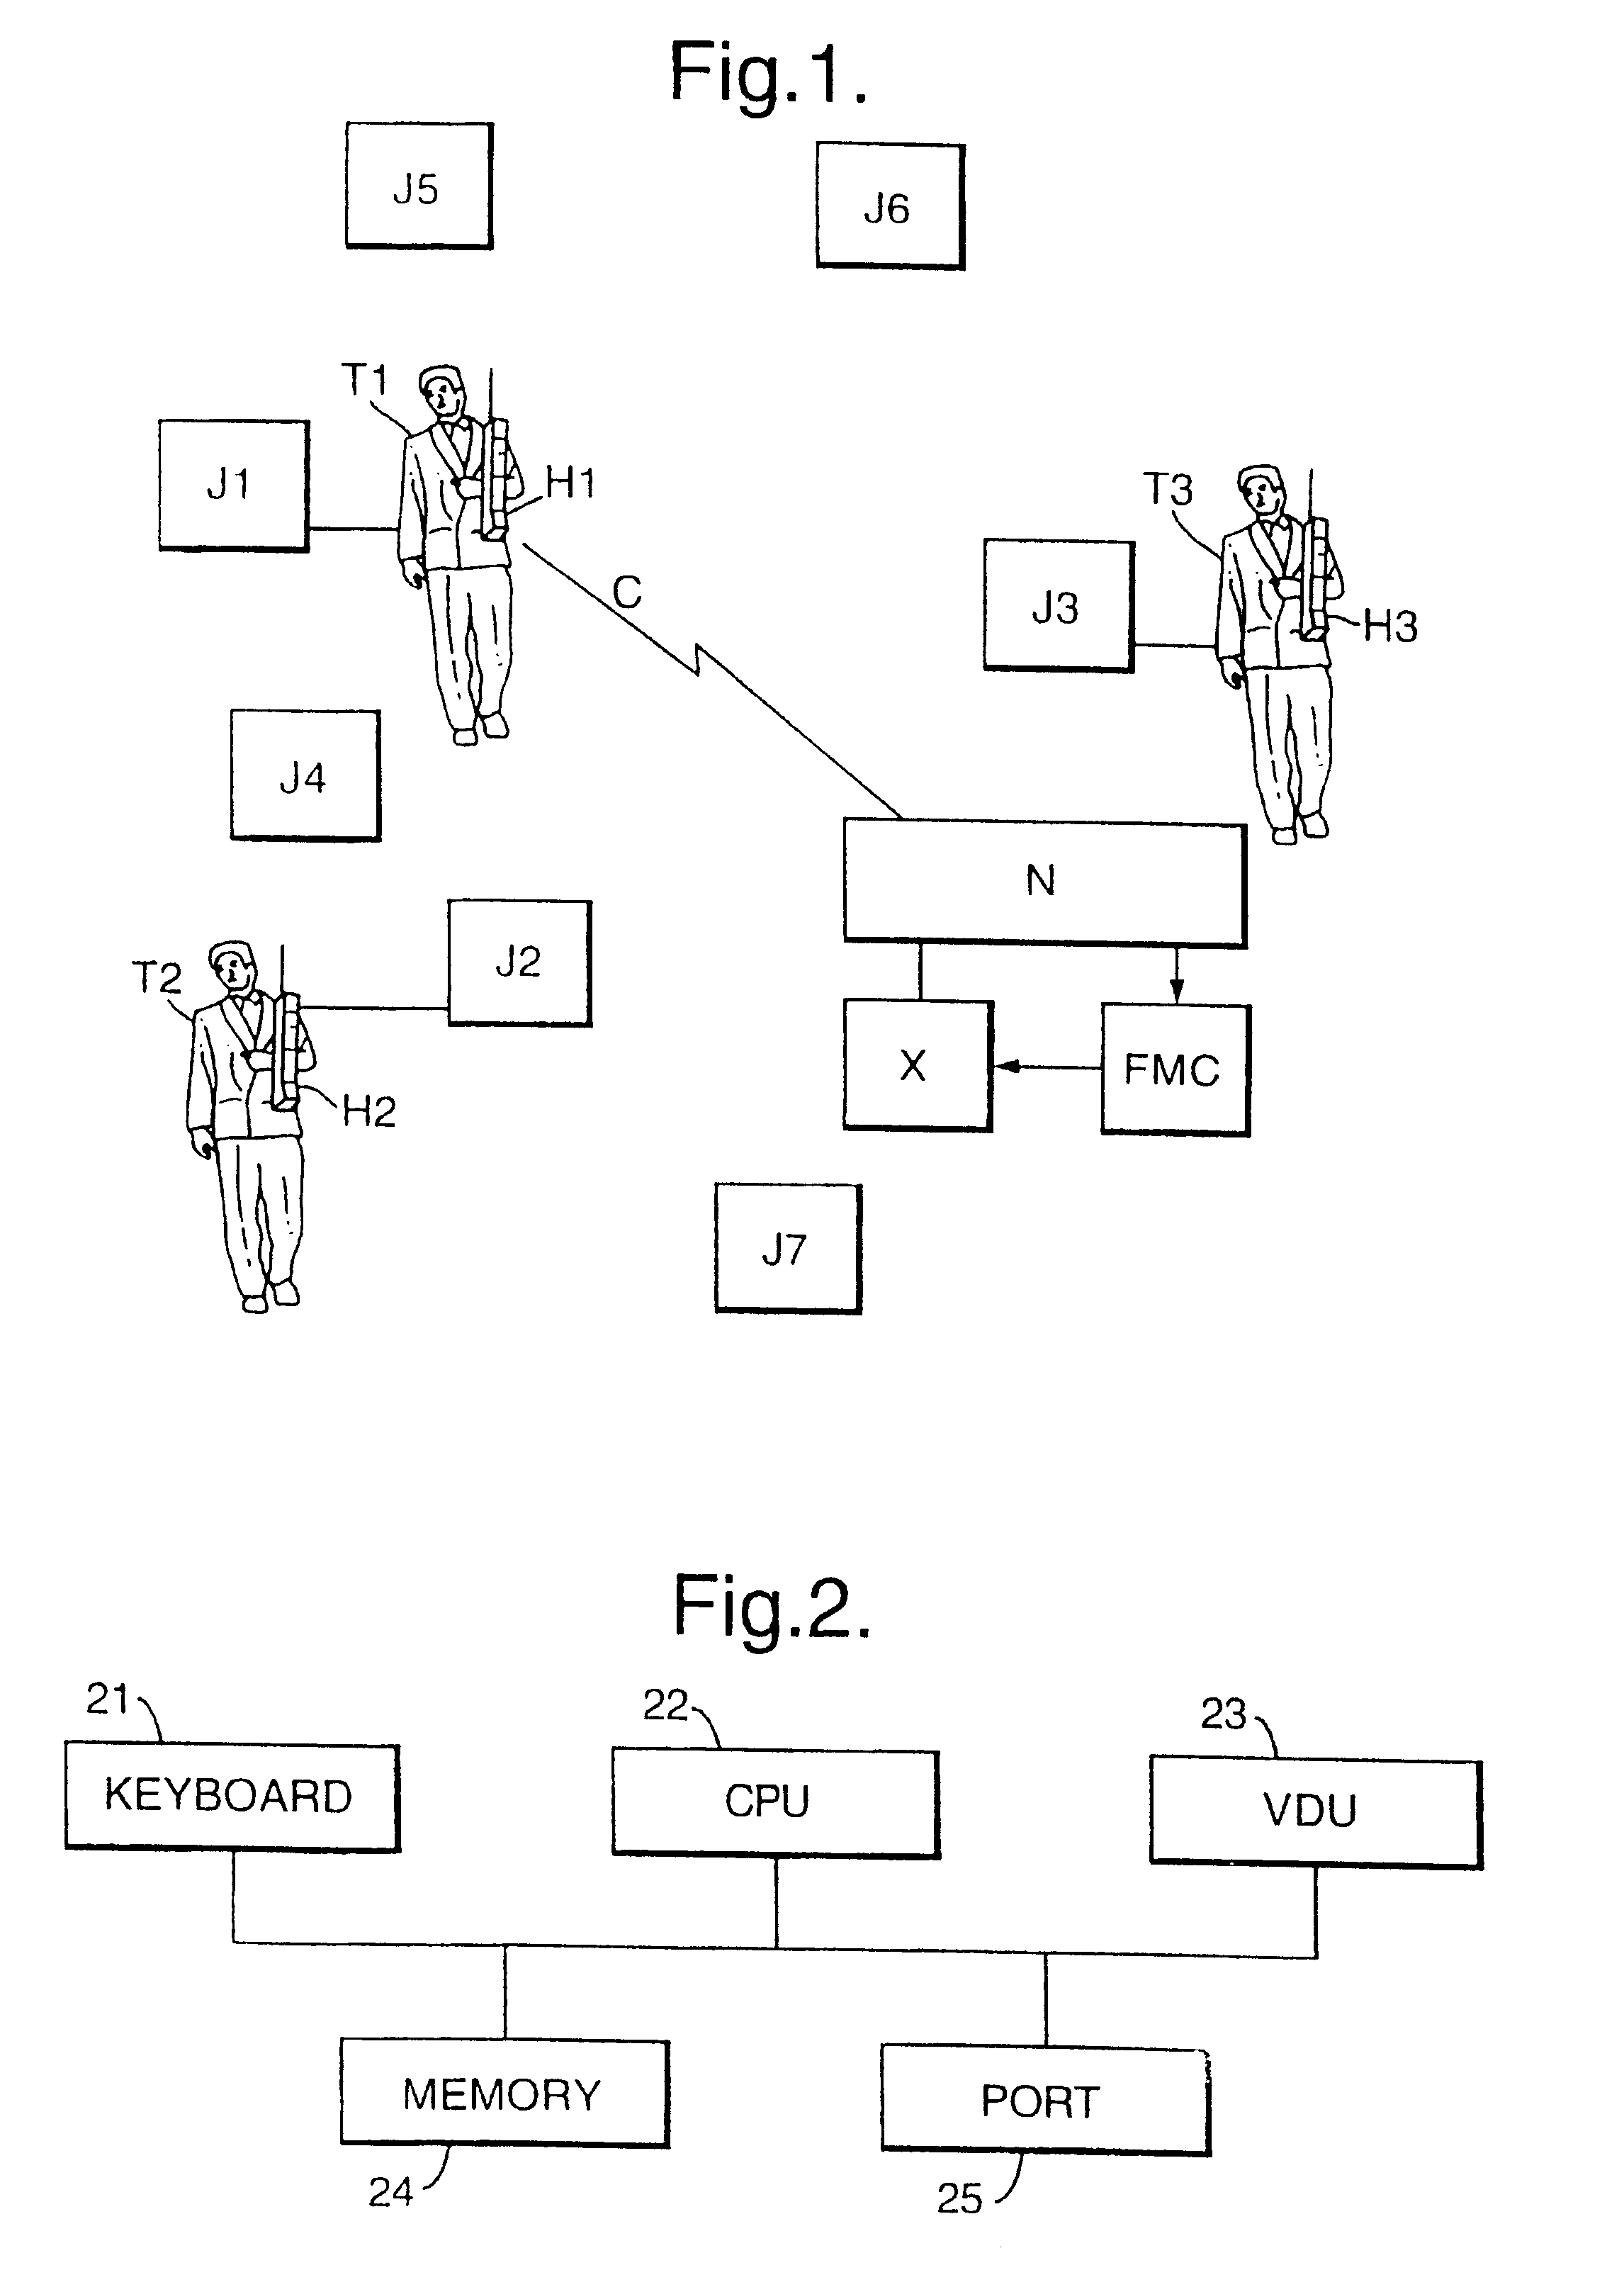 Method and apparatus for resource allocation when schedule changes are incorporated in real time